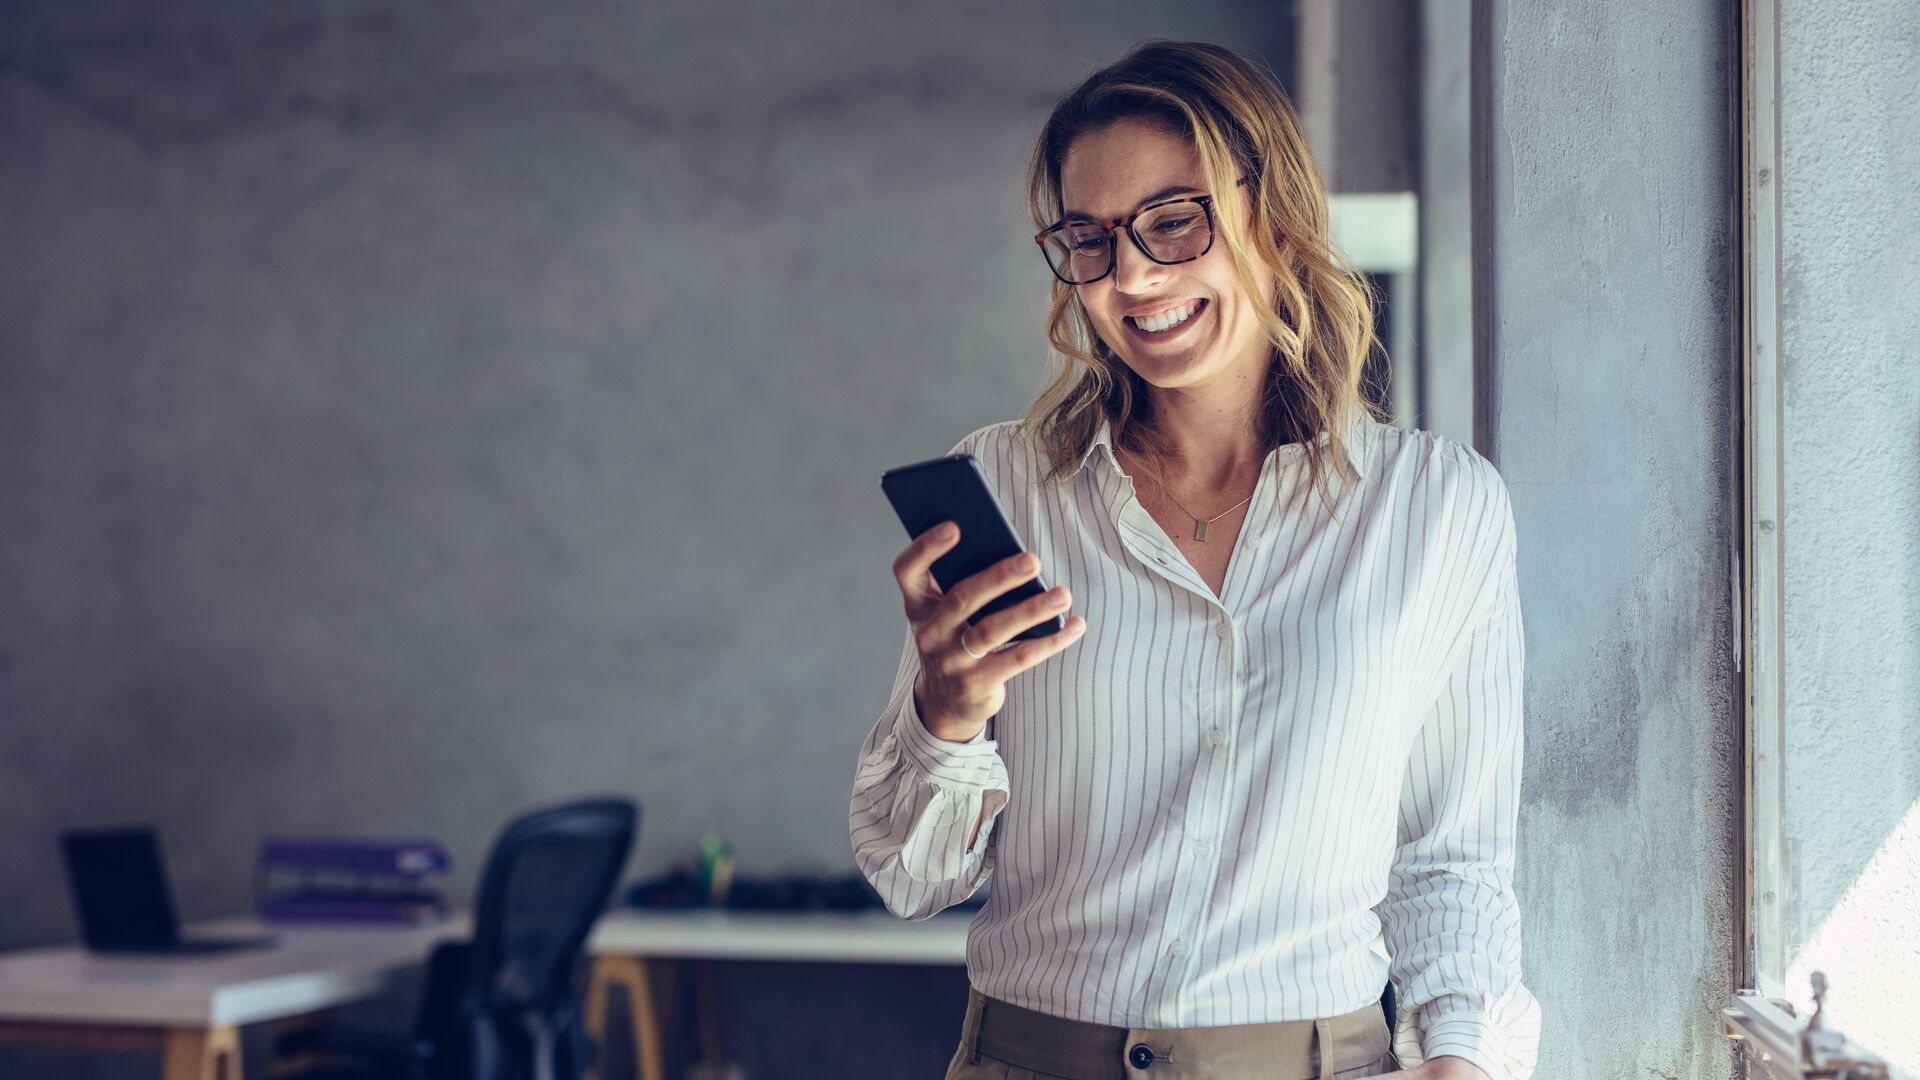 Smiling businesswoman using phone in office